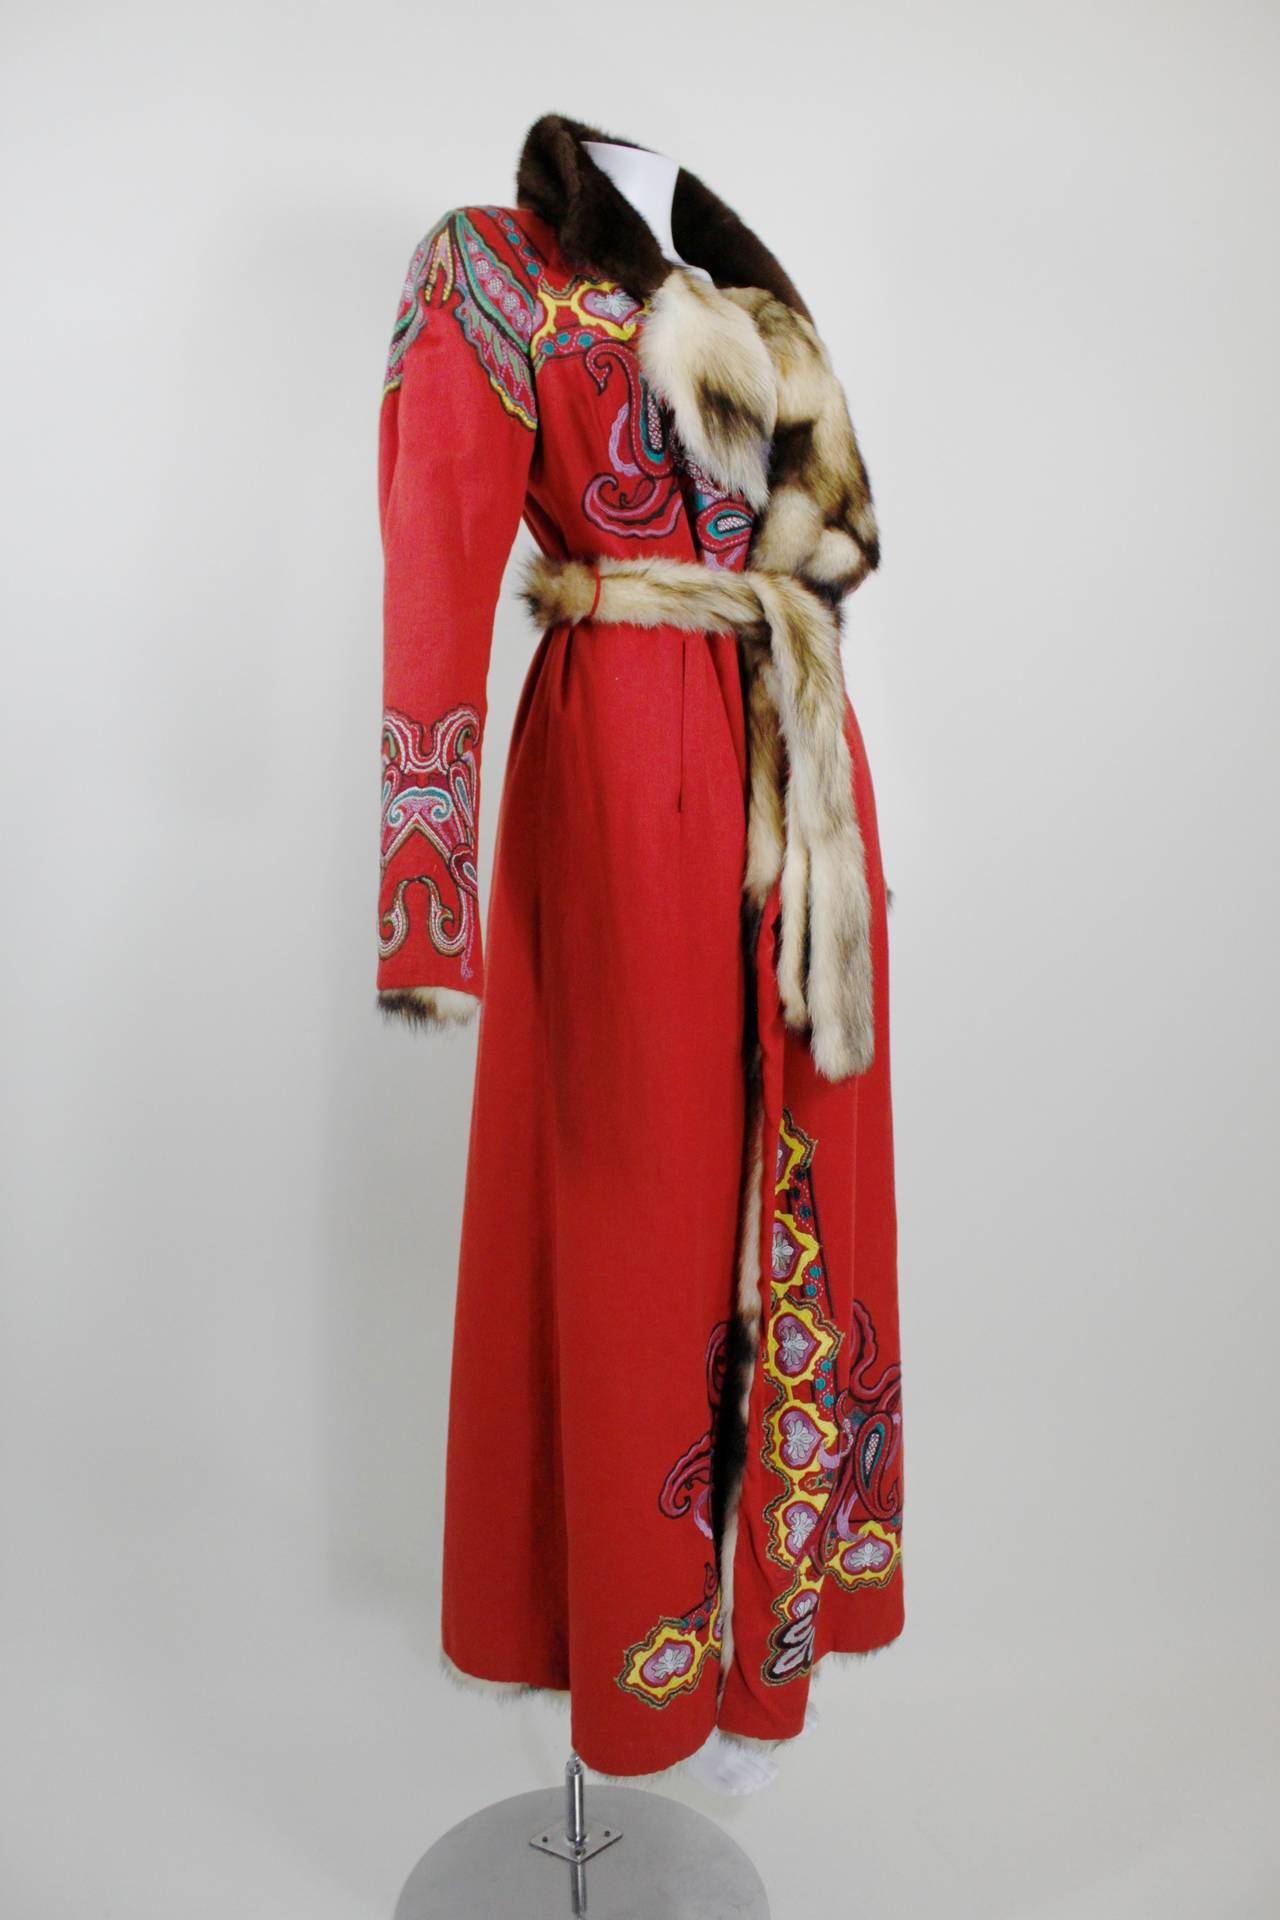 A jaw-dropping, never-been-worn coat from Christian Lacroix. One side of the coat features lipstick red cotton-wool with vibrant rainbow embroidery throughout, and a mink collar. The coat can be reversed into a full fur coat (the red embroidered